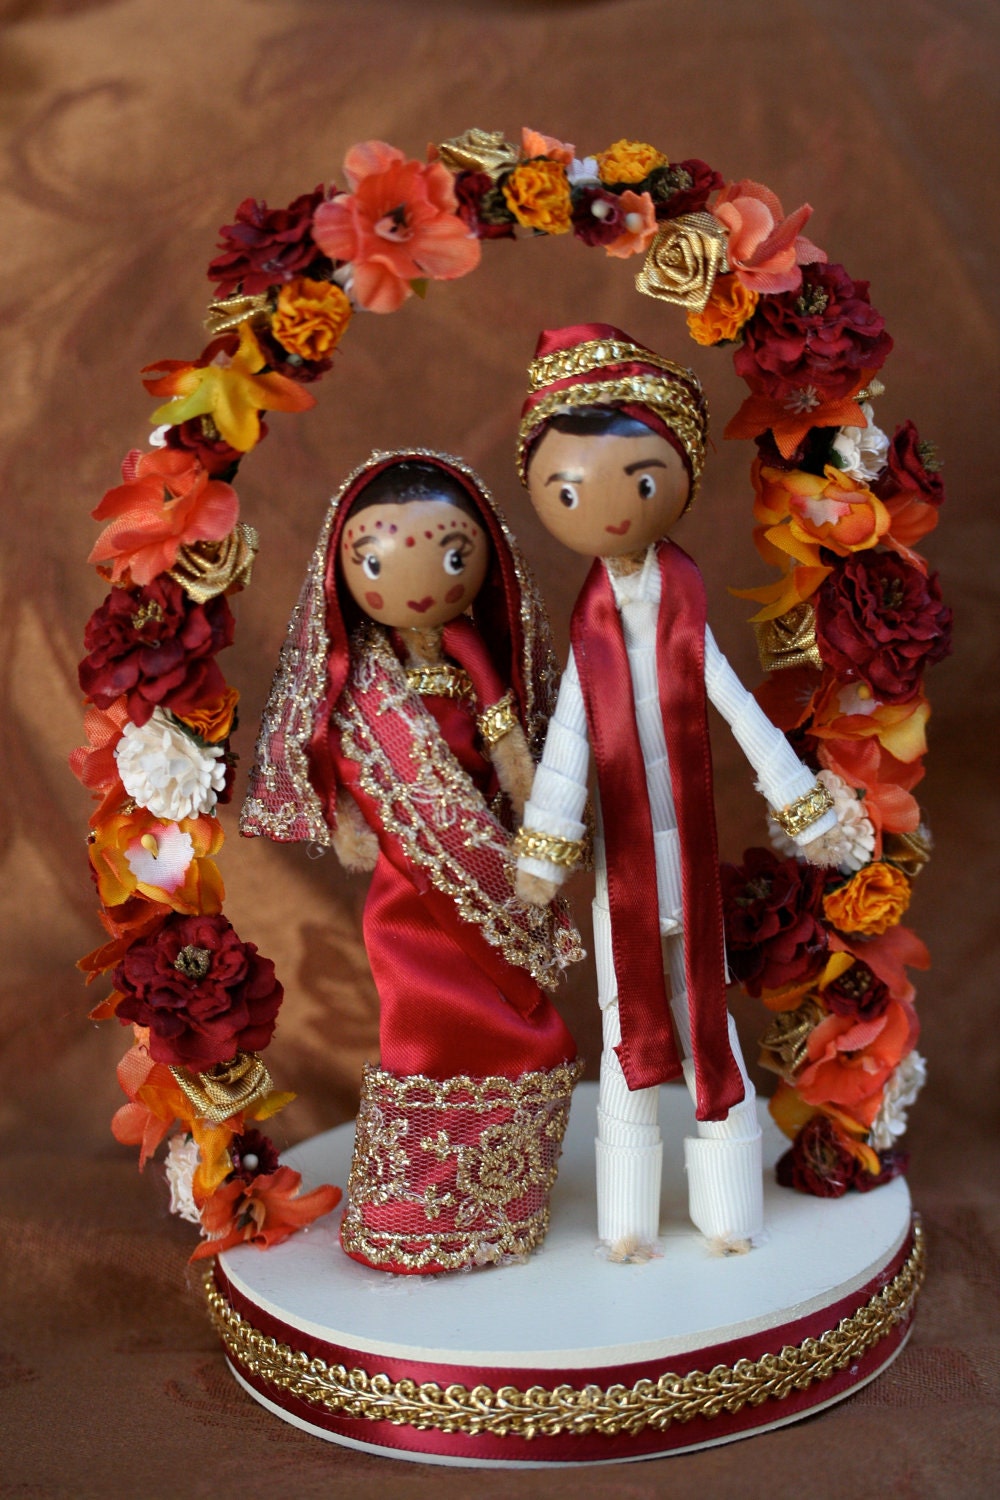 Indian Caketopper with Flower Arch - marmaladetradingco